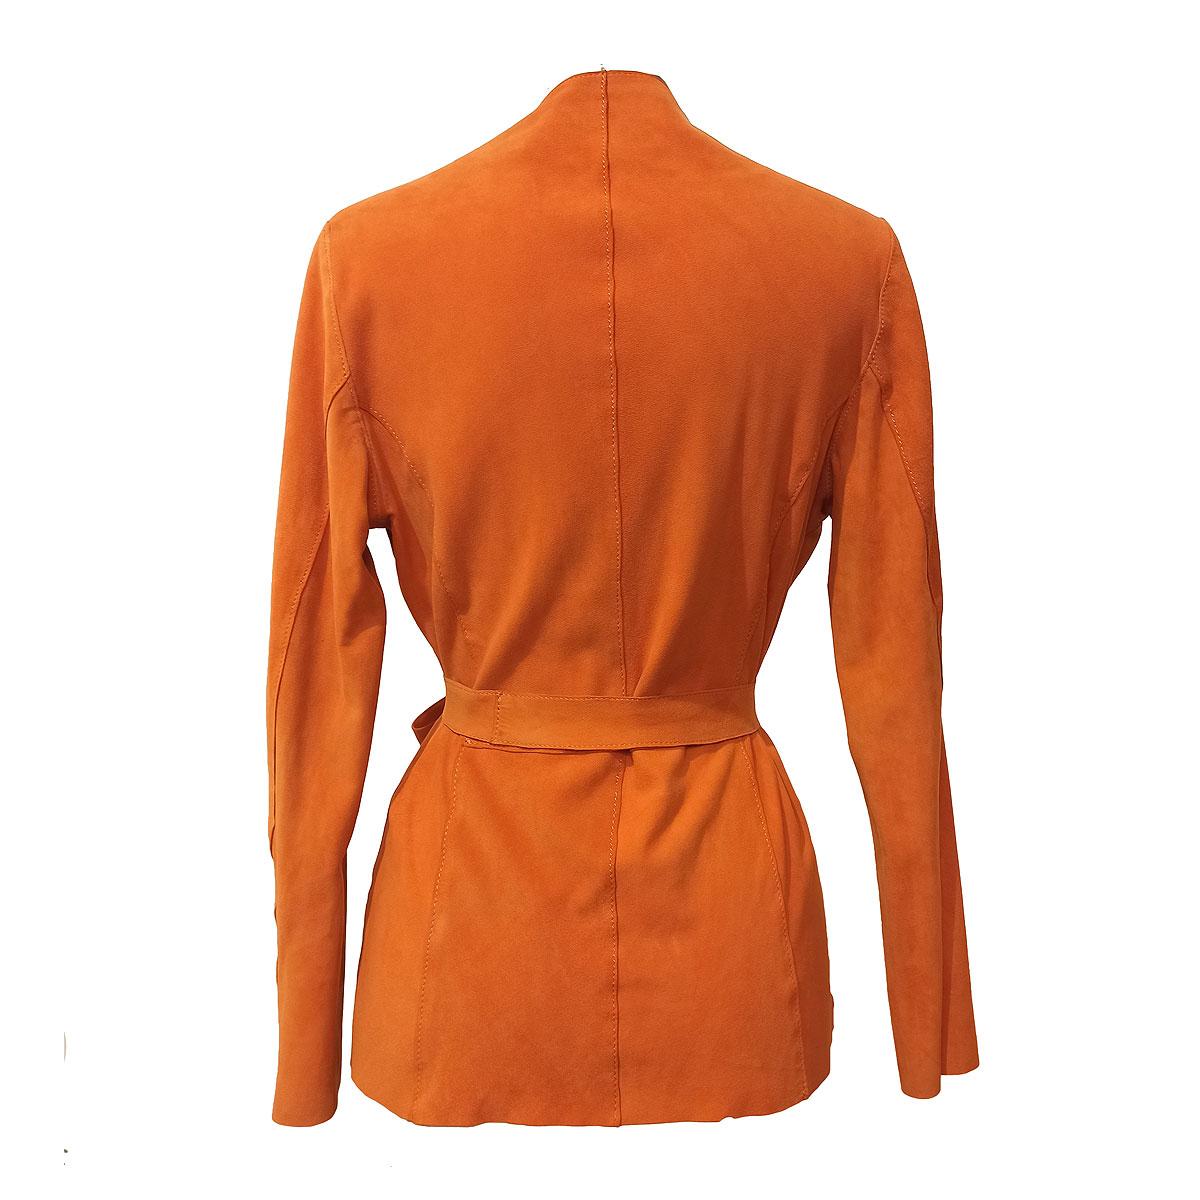 Amazing quality for this suede jacket
Suede
Orange color
With belt
Visible stitching
Length shoulder/hem cm 55 (21,65 inches)
Shoulder cm 38 (14,9 inches)
French size 36, italian 40 
WORLDWIDE EXPRESS SHIPPING INCLUDED IN THE PRICE !